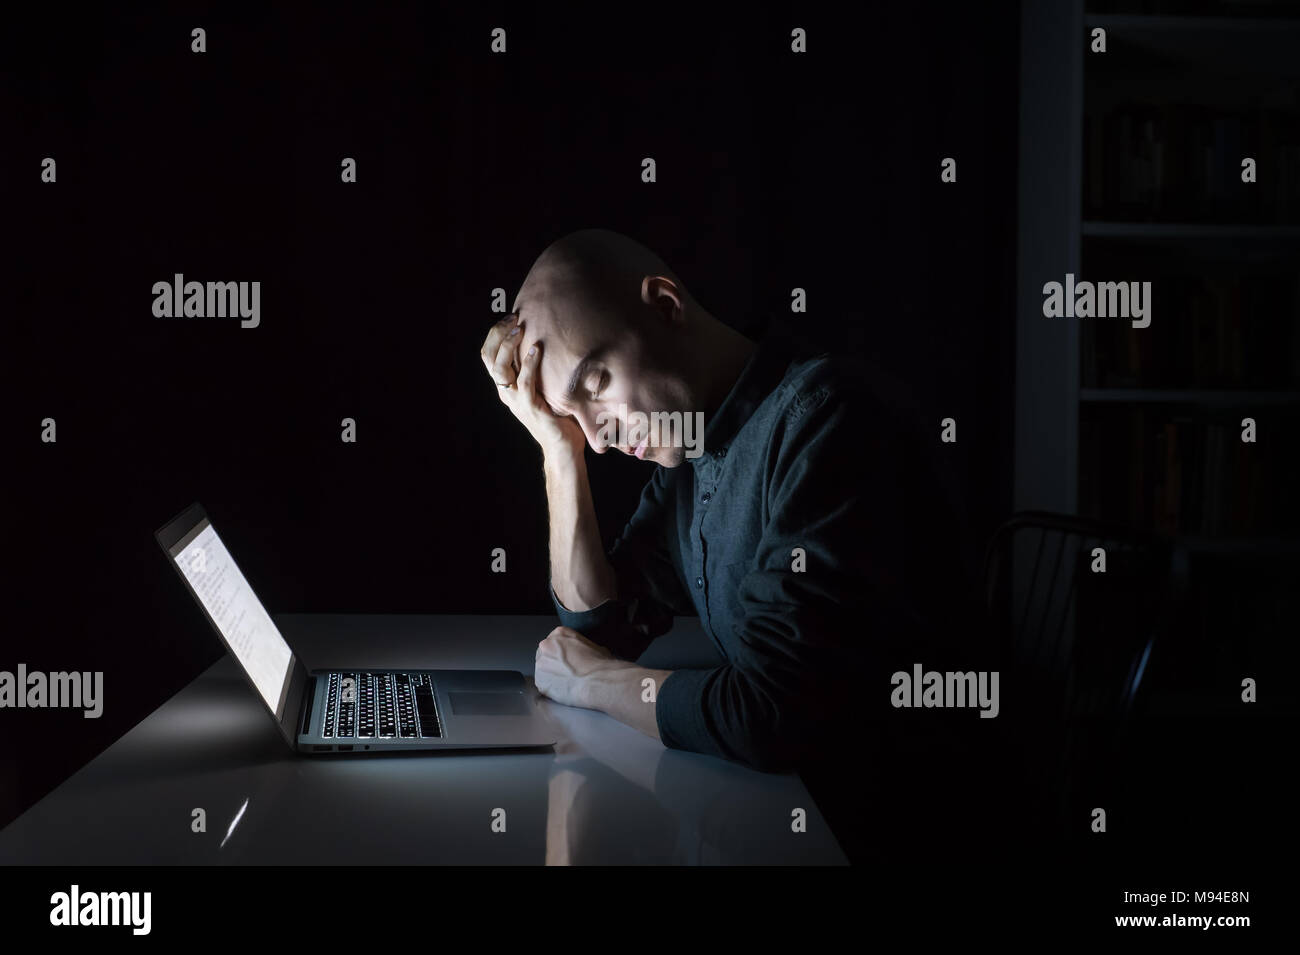 Tired or exhausted man at computer late in the evening with closed eyes. Portrait of young male person working or studying at laptop at night - concep Stock Photo